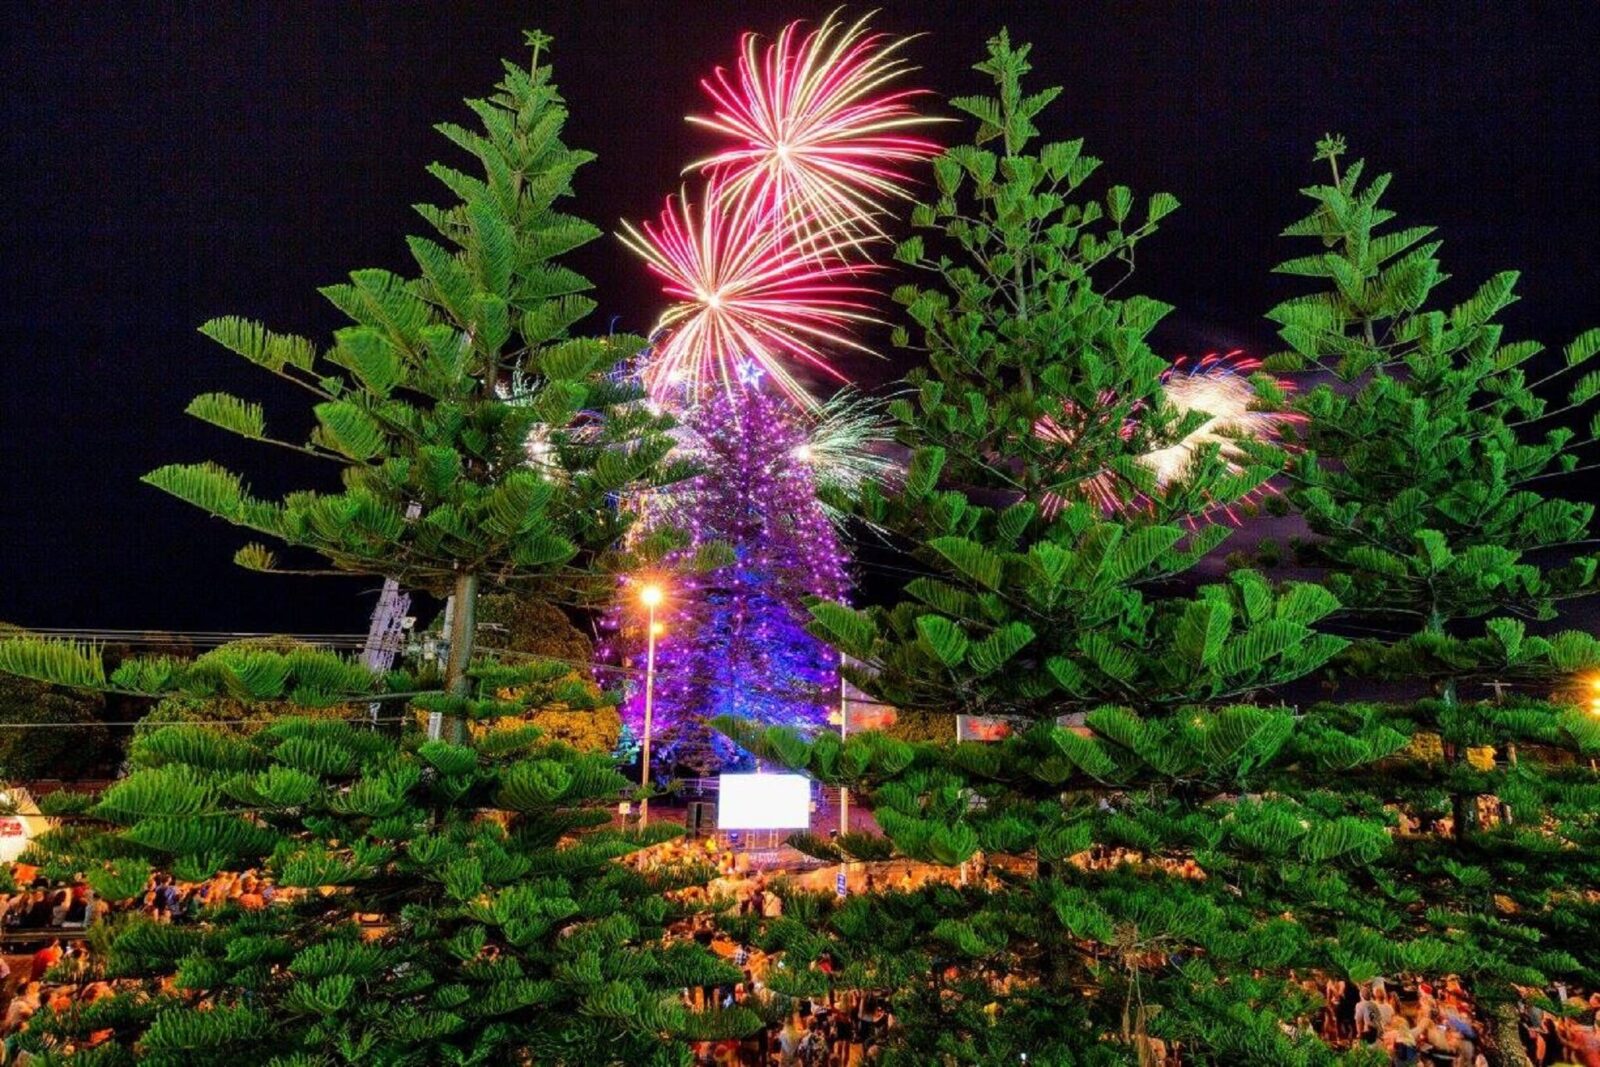 A 30m high norfolk pine is lit up with Christmas lights with fireworks in the background